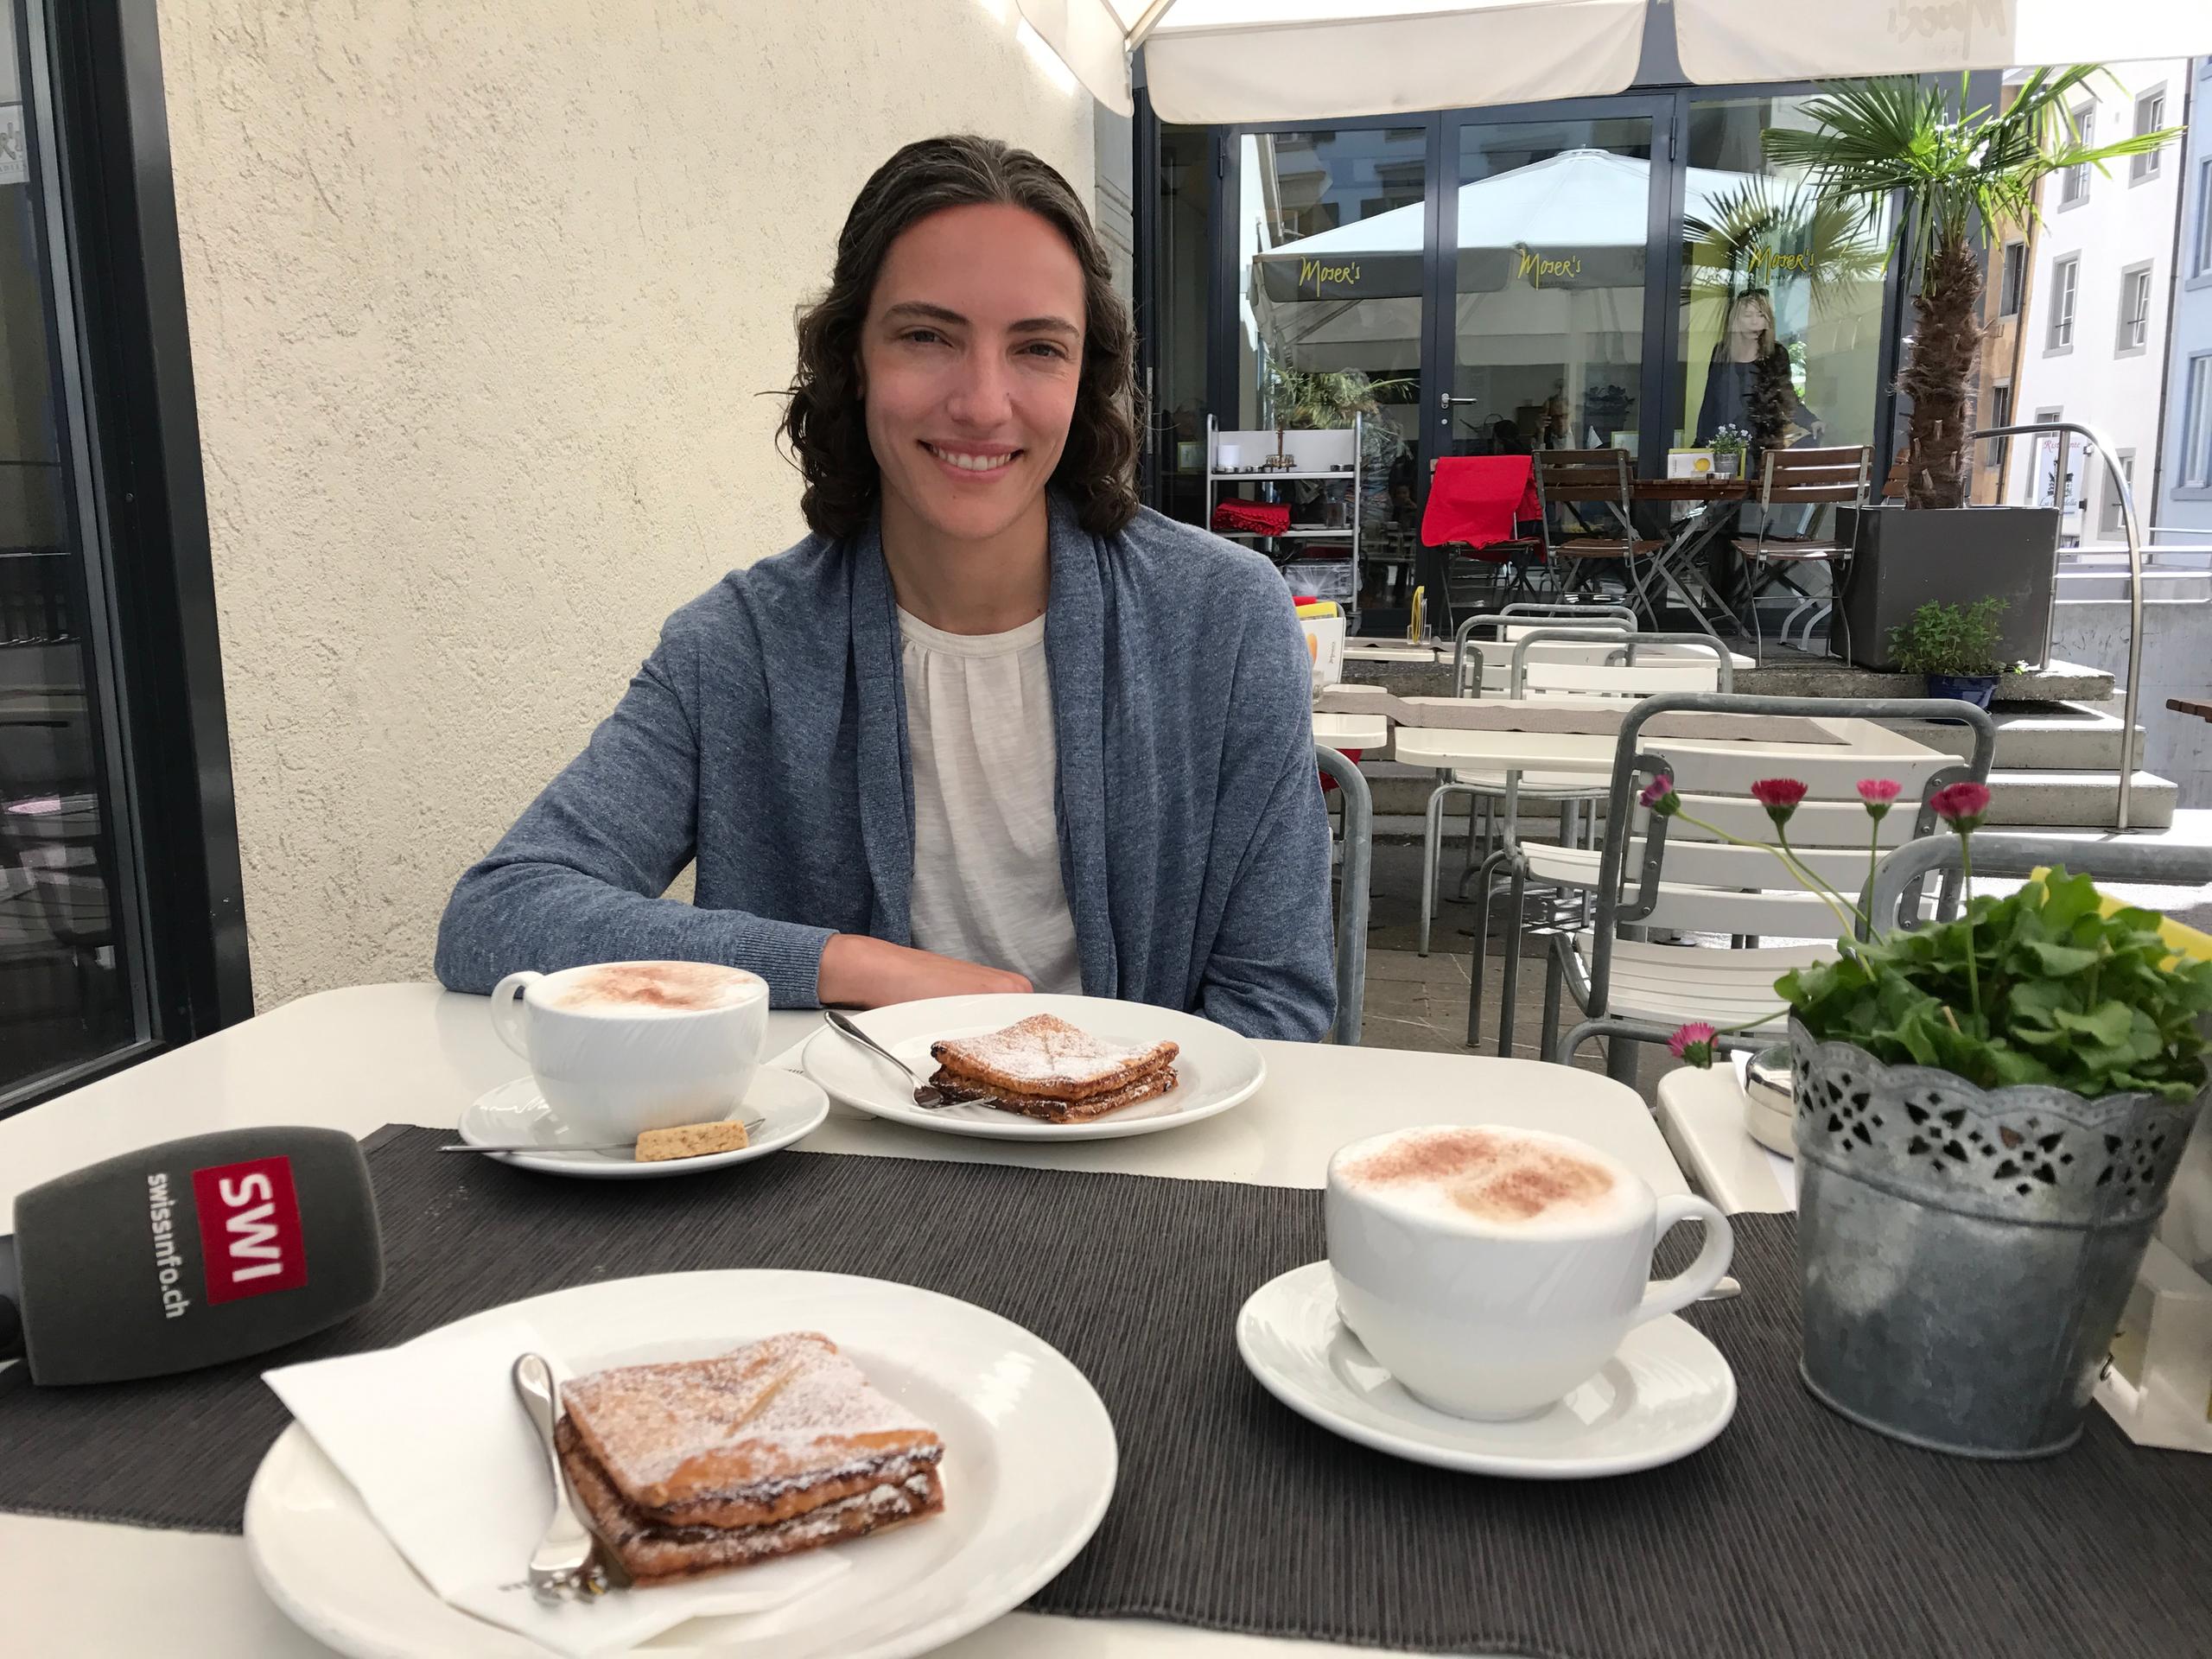 Woman sitting at a cafe with coffee and pastry